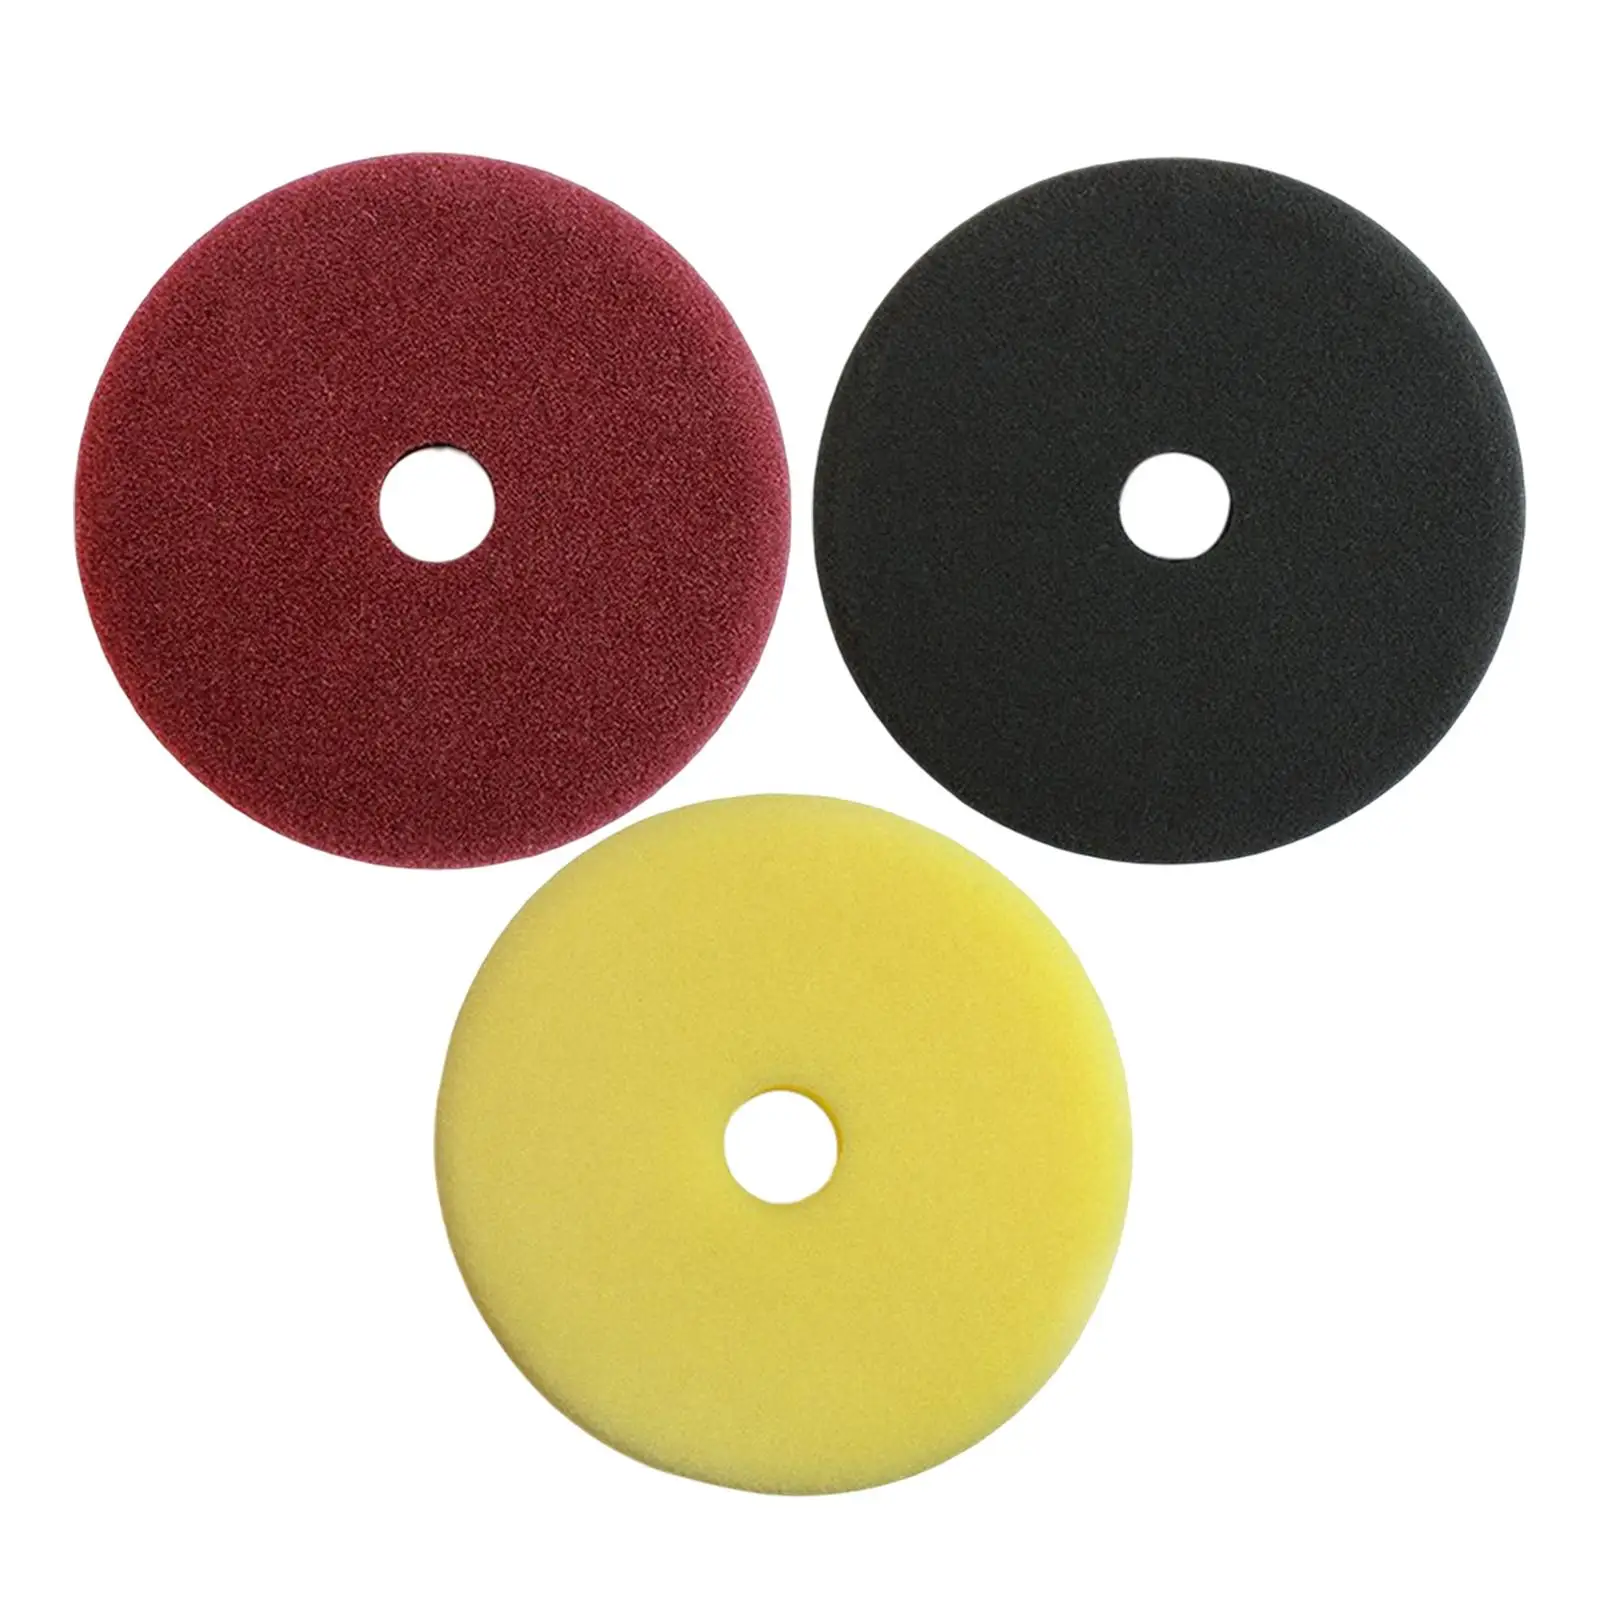 3 Pieces 7 Inches car Buffing Polishing Pads Compound Buffing Pads Polishing Pads for  Polisher Sanding